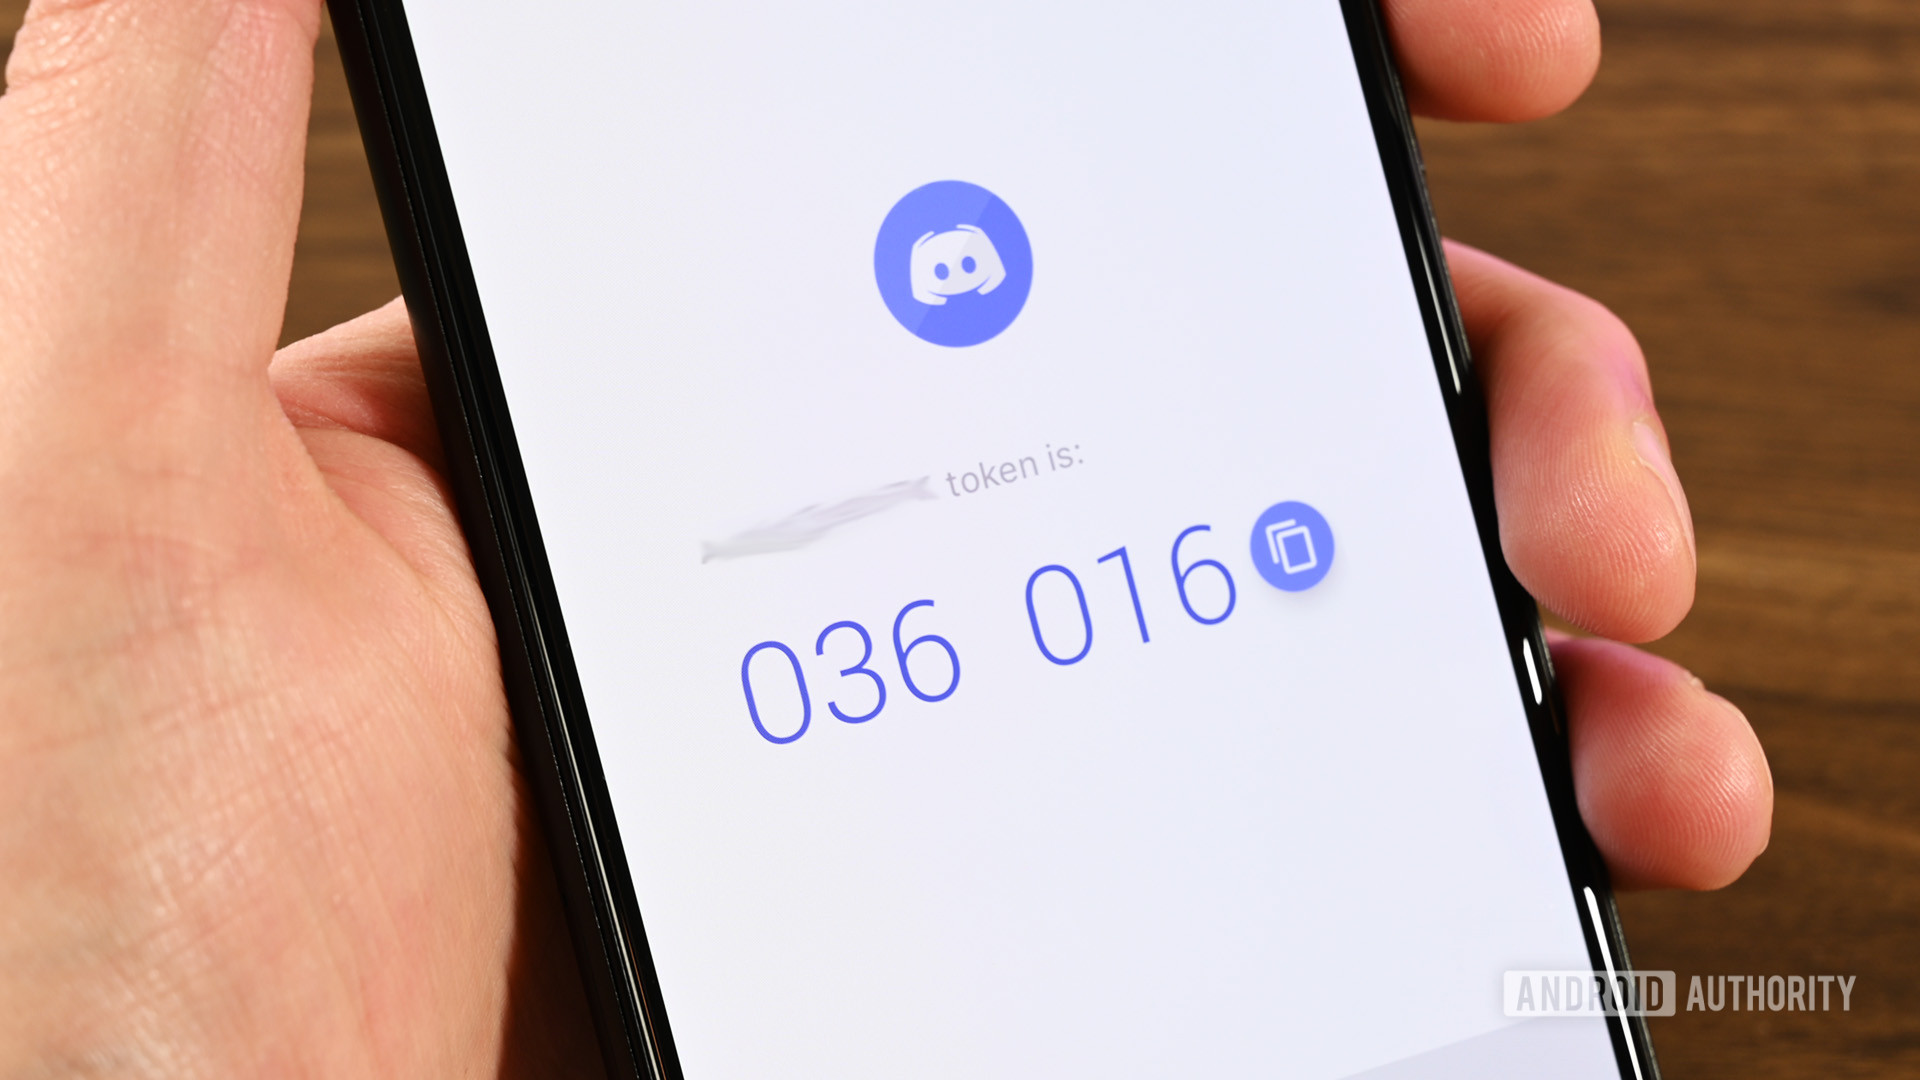 Authy Authenticator by Twilio